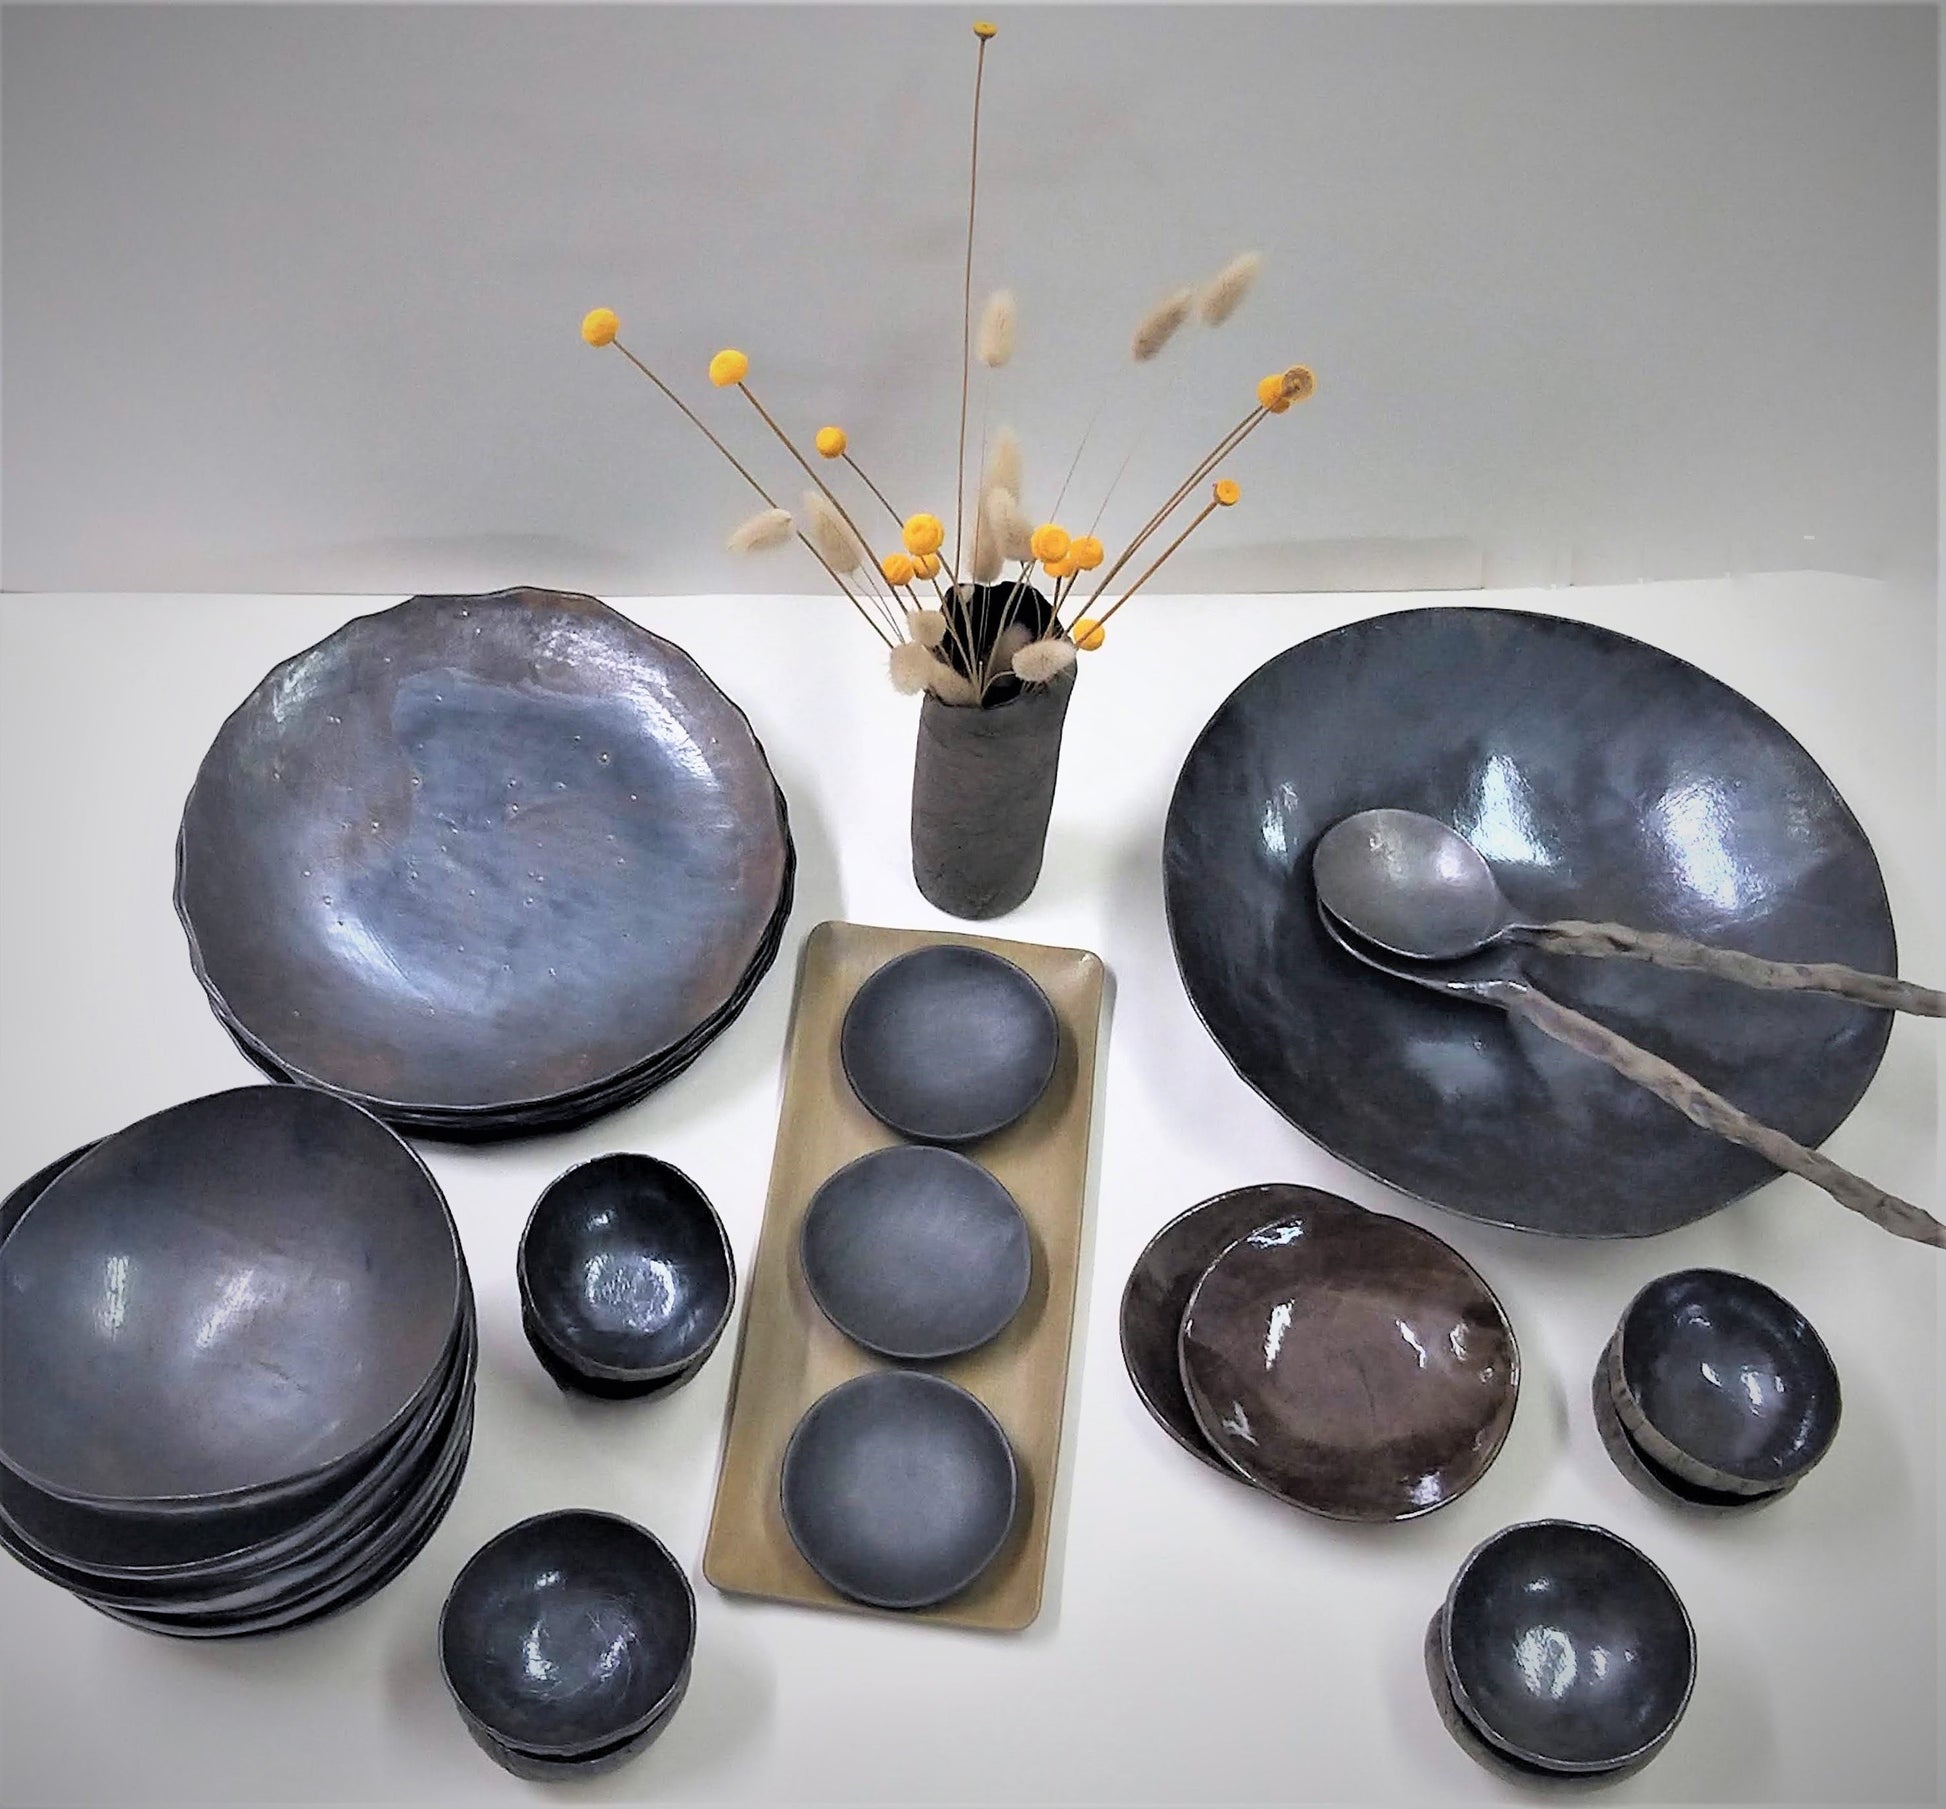 Display of black ceramic tableware placed on a table